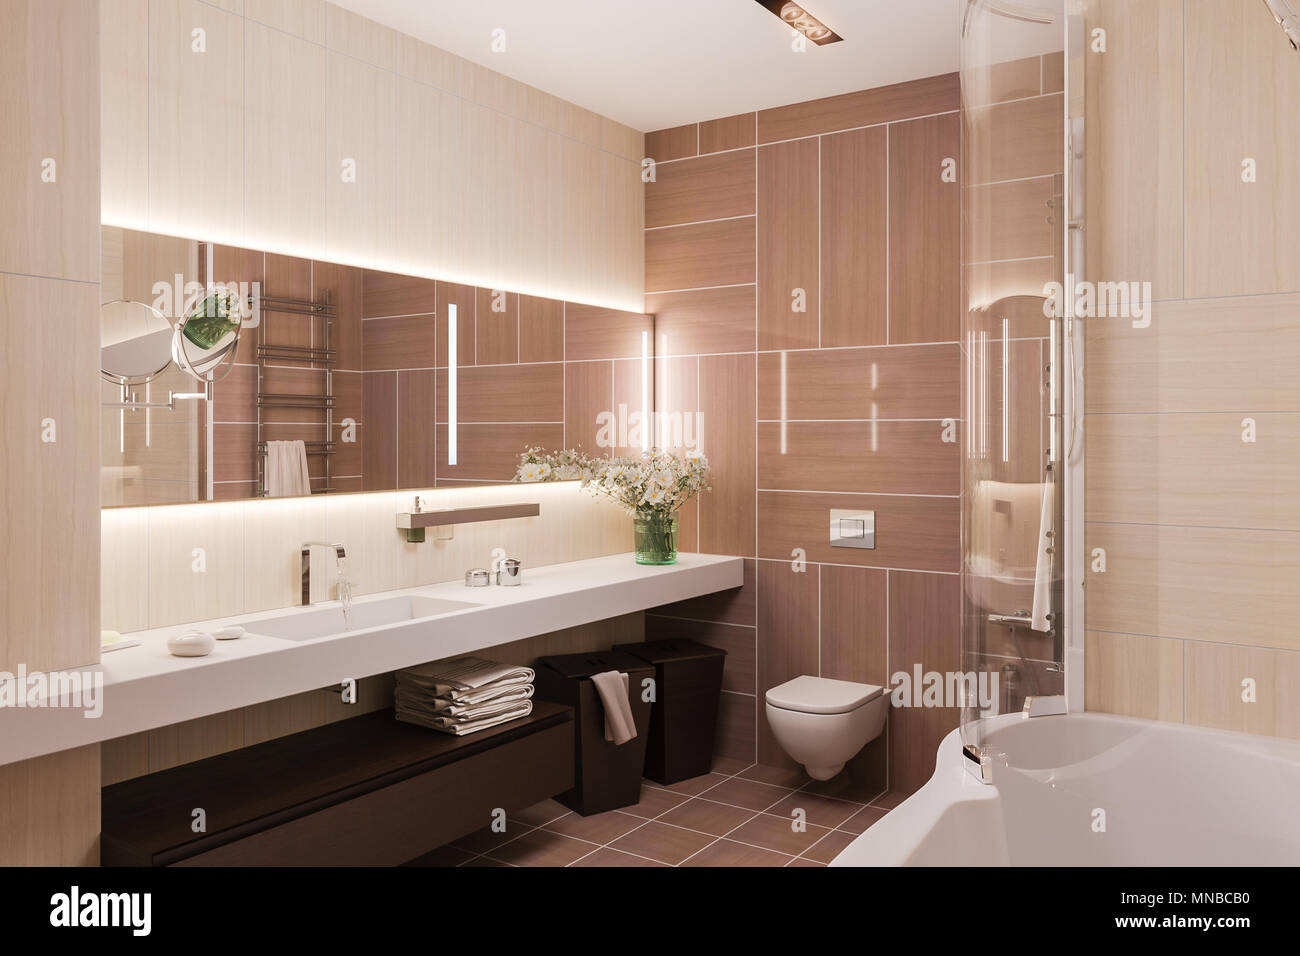 Interior Design Of A Modern Bathroom With A Large Mirror 3d